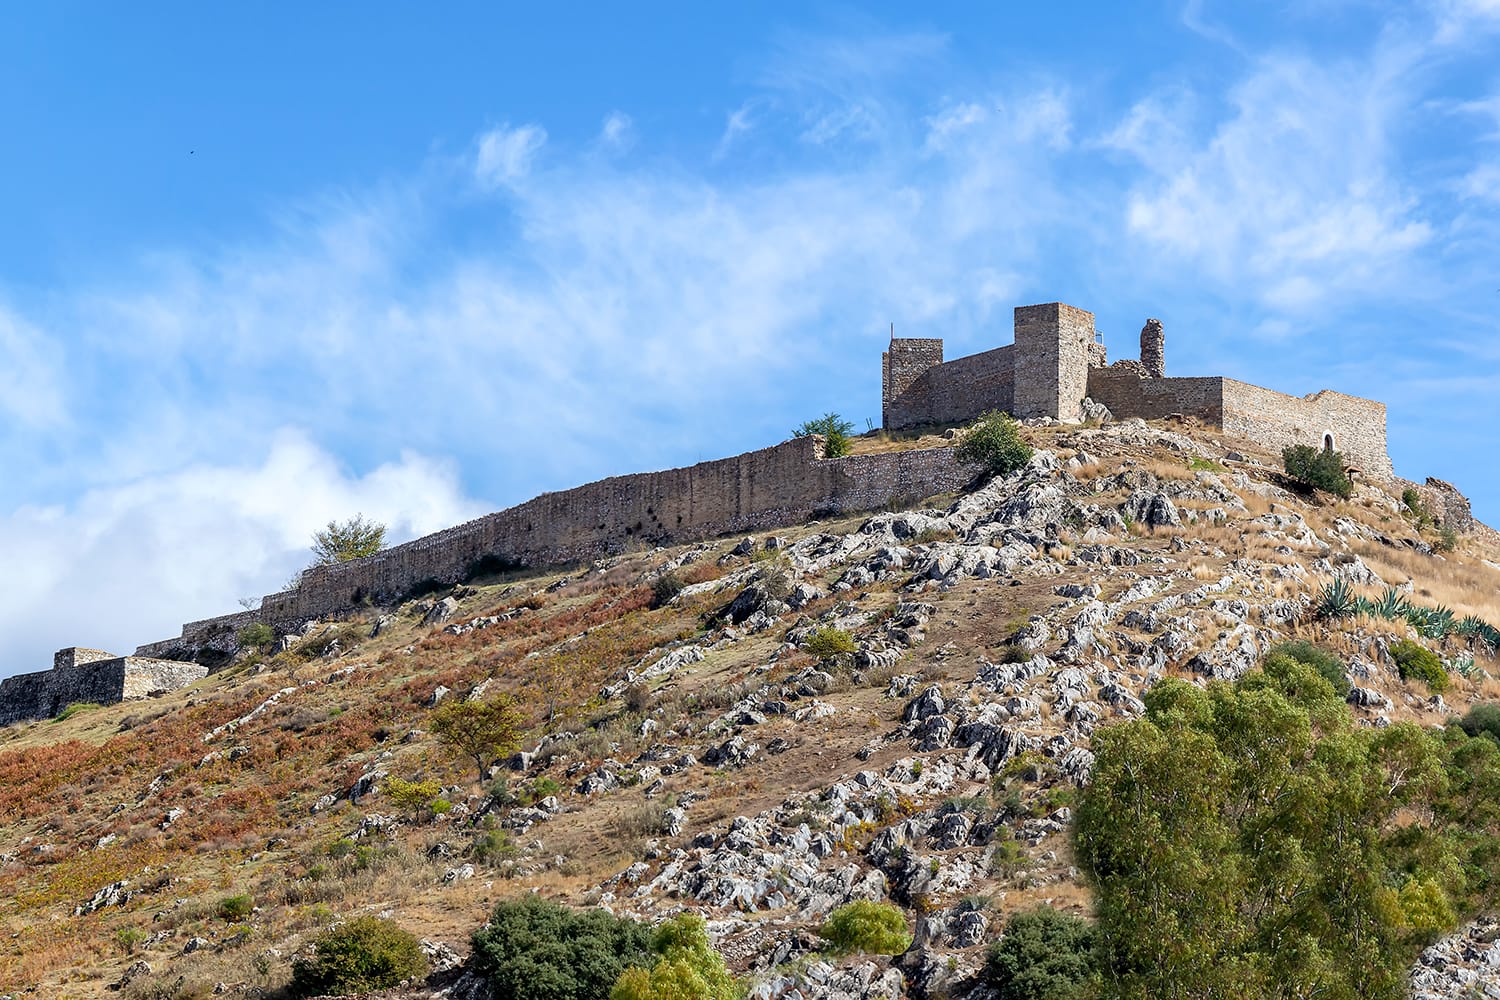 The Aracena castle built between the 13th and 15th centuries over the ruins of an older Moorish Castle